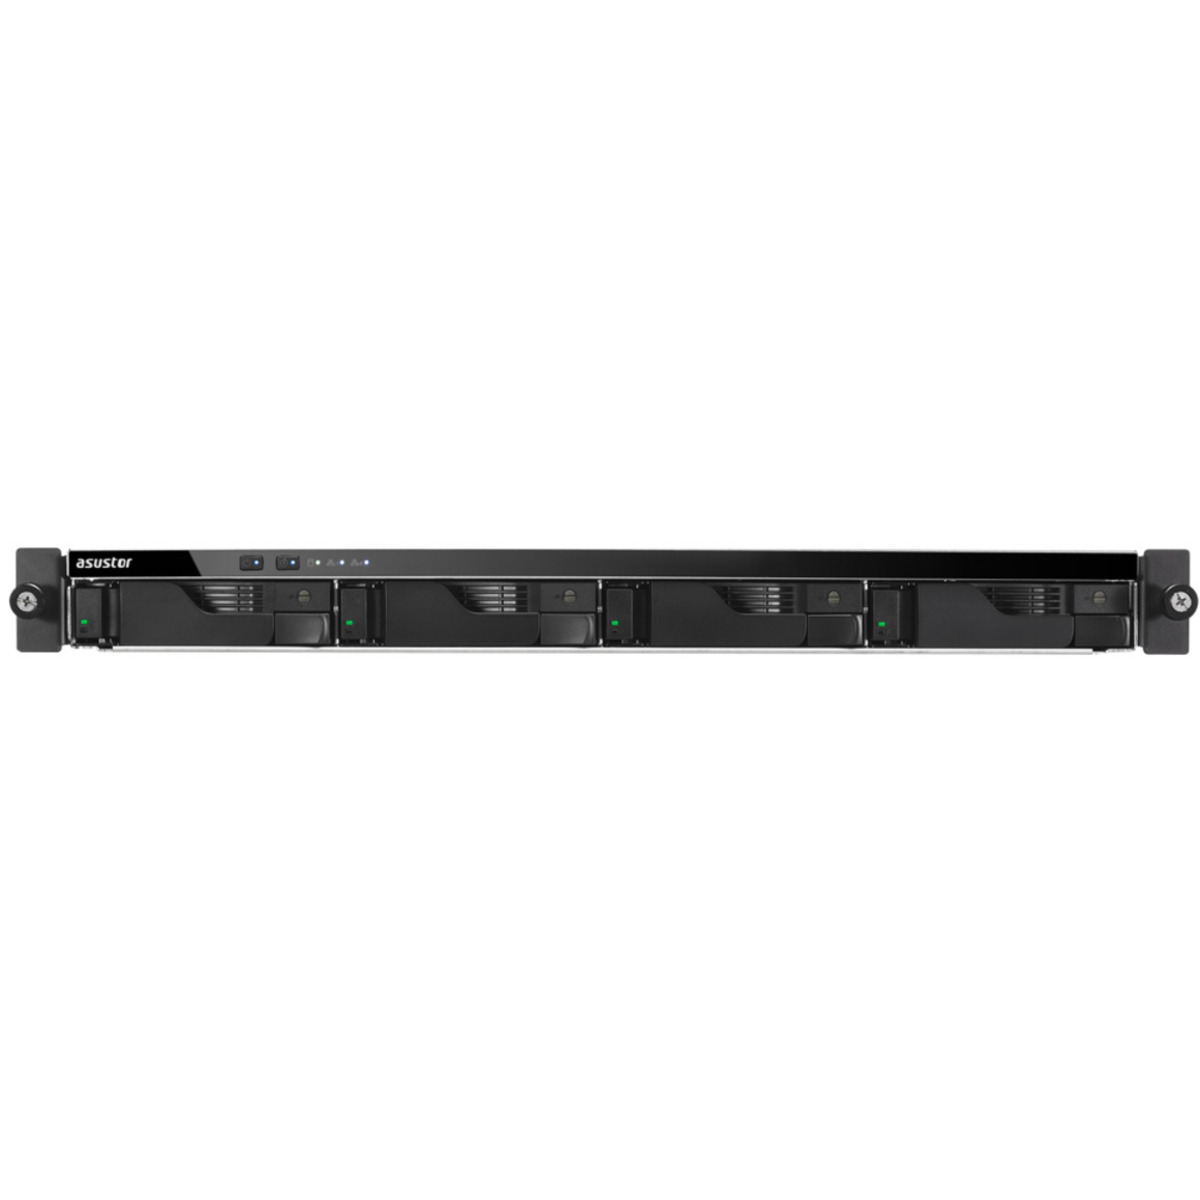 ASUSTOR LOCKERSTOR 4RD AS6504RD RackMount 4-Bay Multimedia / Power User / Business NAS - Network Attached Storage Device Burn-In Tested Configurations - FREE RAM UPGRADE LOCKERSTOR 4RD AS6504RD